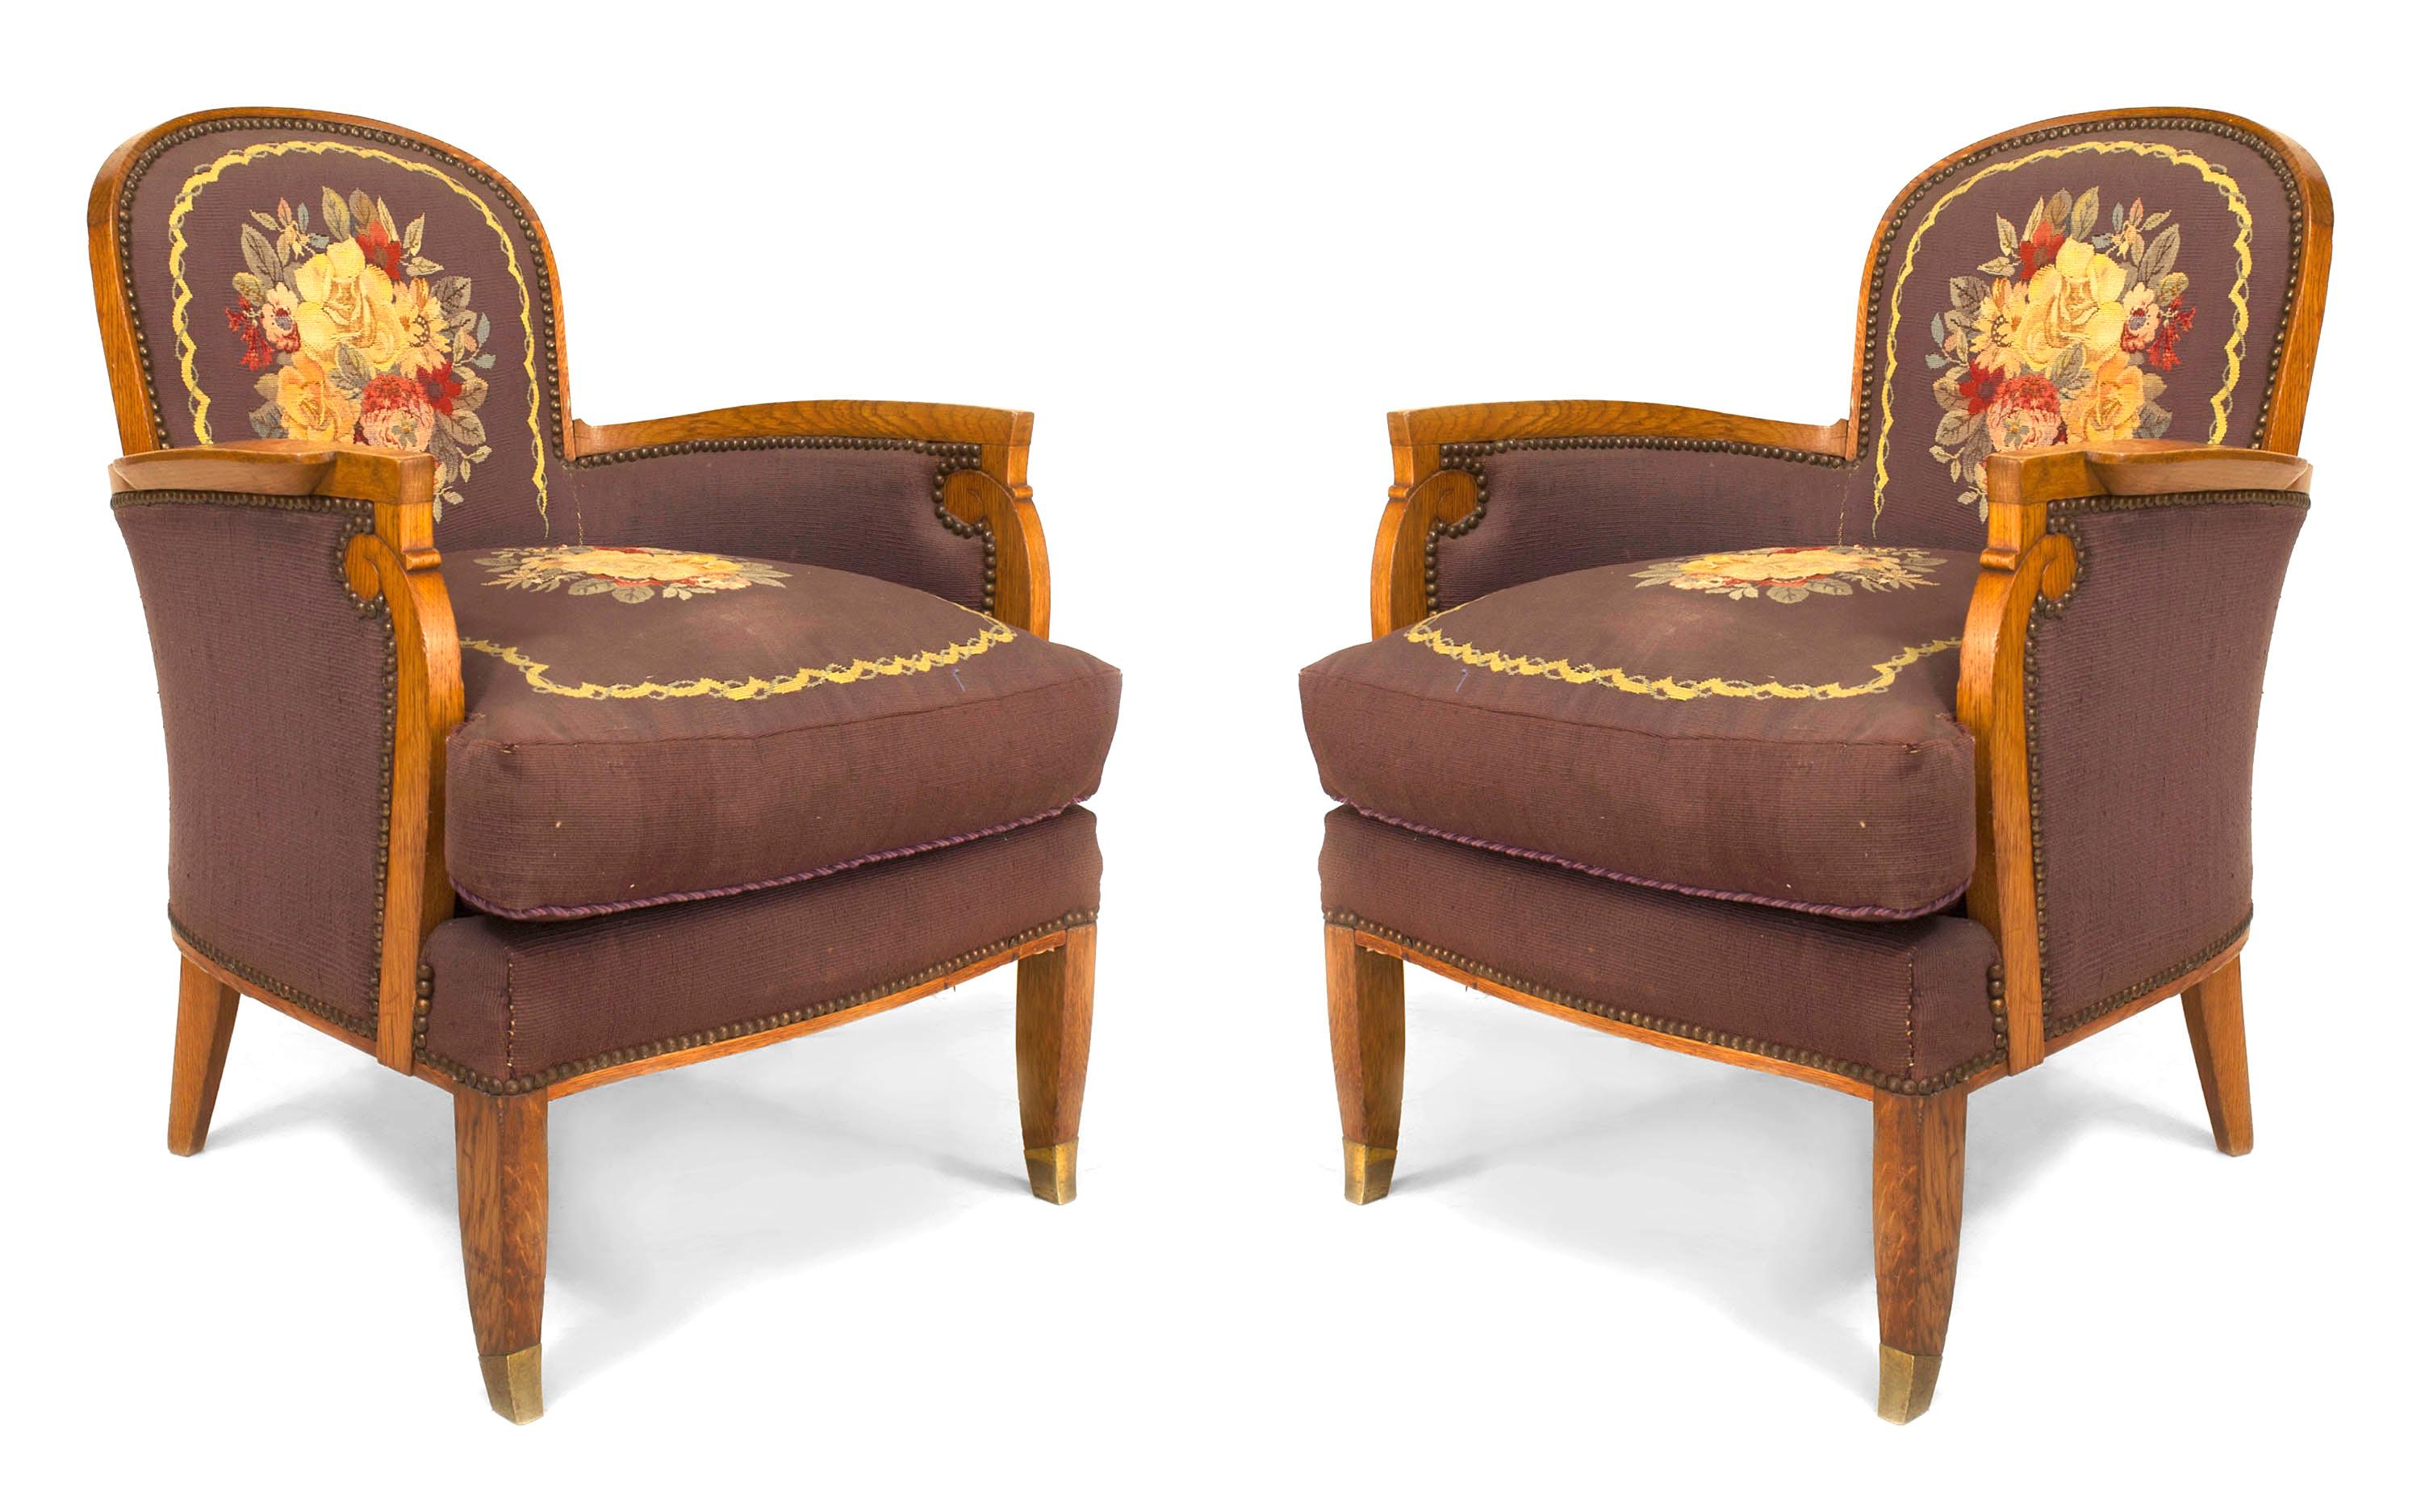 Pair of French Art Deco (Circa 1940) berger√©s Armchairs with tapestry upholstery having a round back and scroll design arm (by JULES LELEU) (Reference: Decorateurs Ensemble, Francoise Siriex) (PRICED AS Pair)
